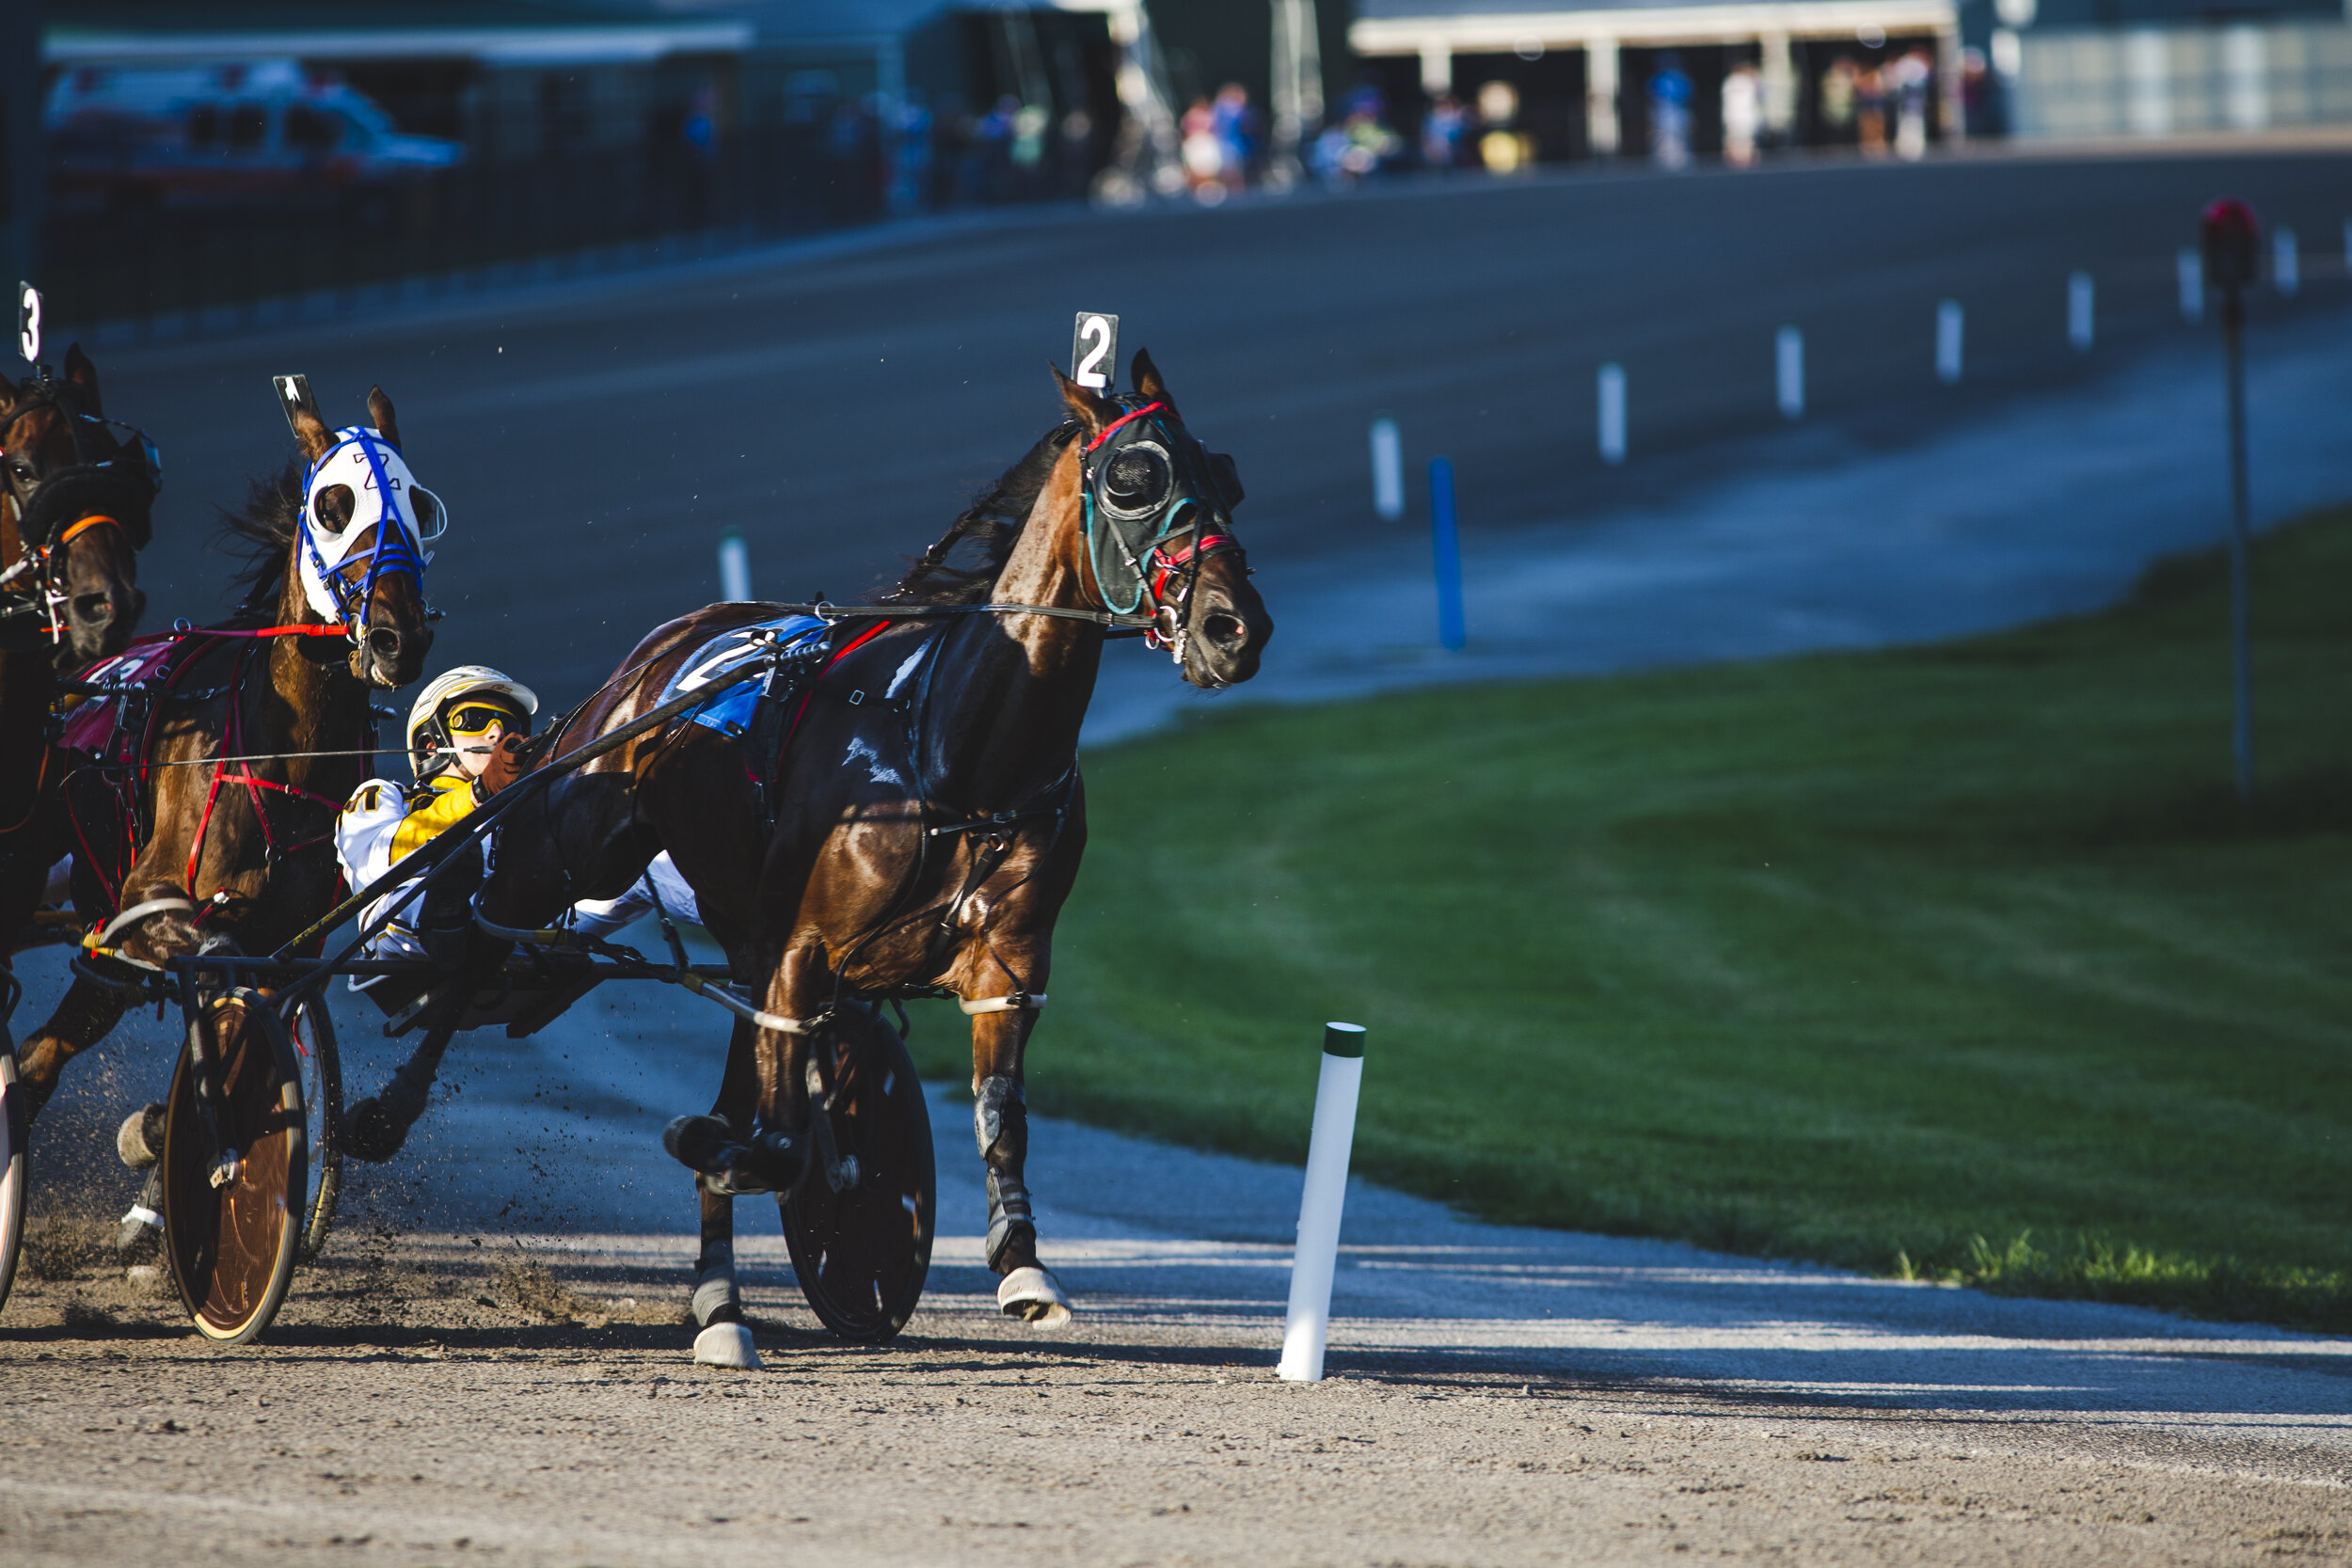  Drew Monti competes in a harness race at Batavia Downs in Batavia, NY.  